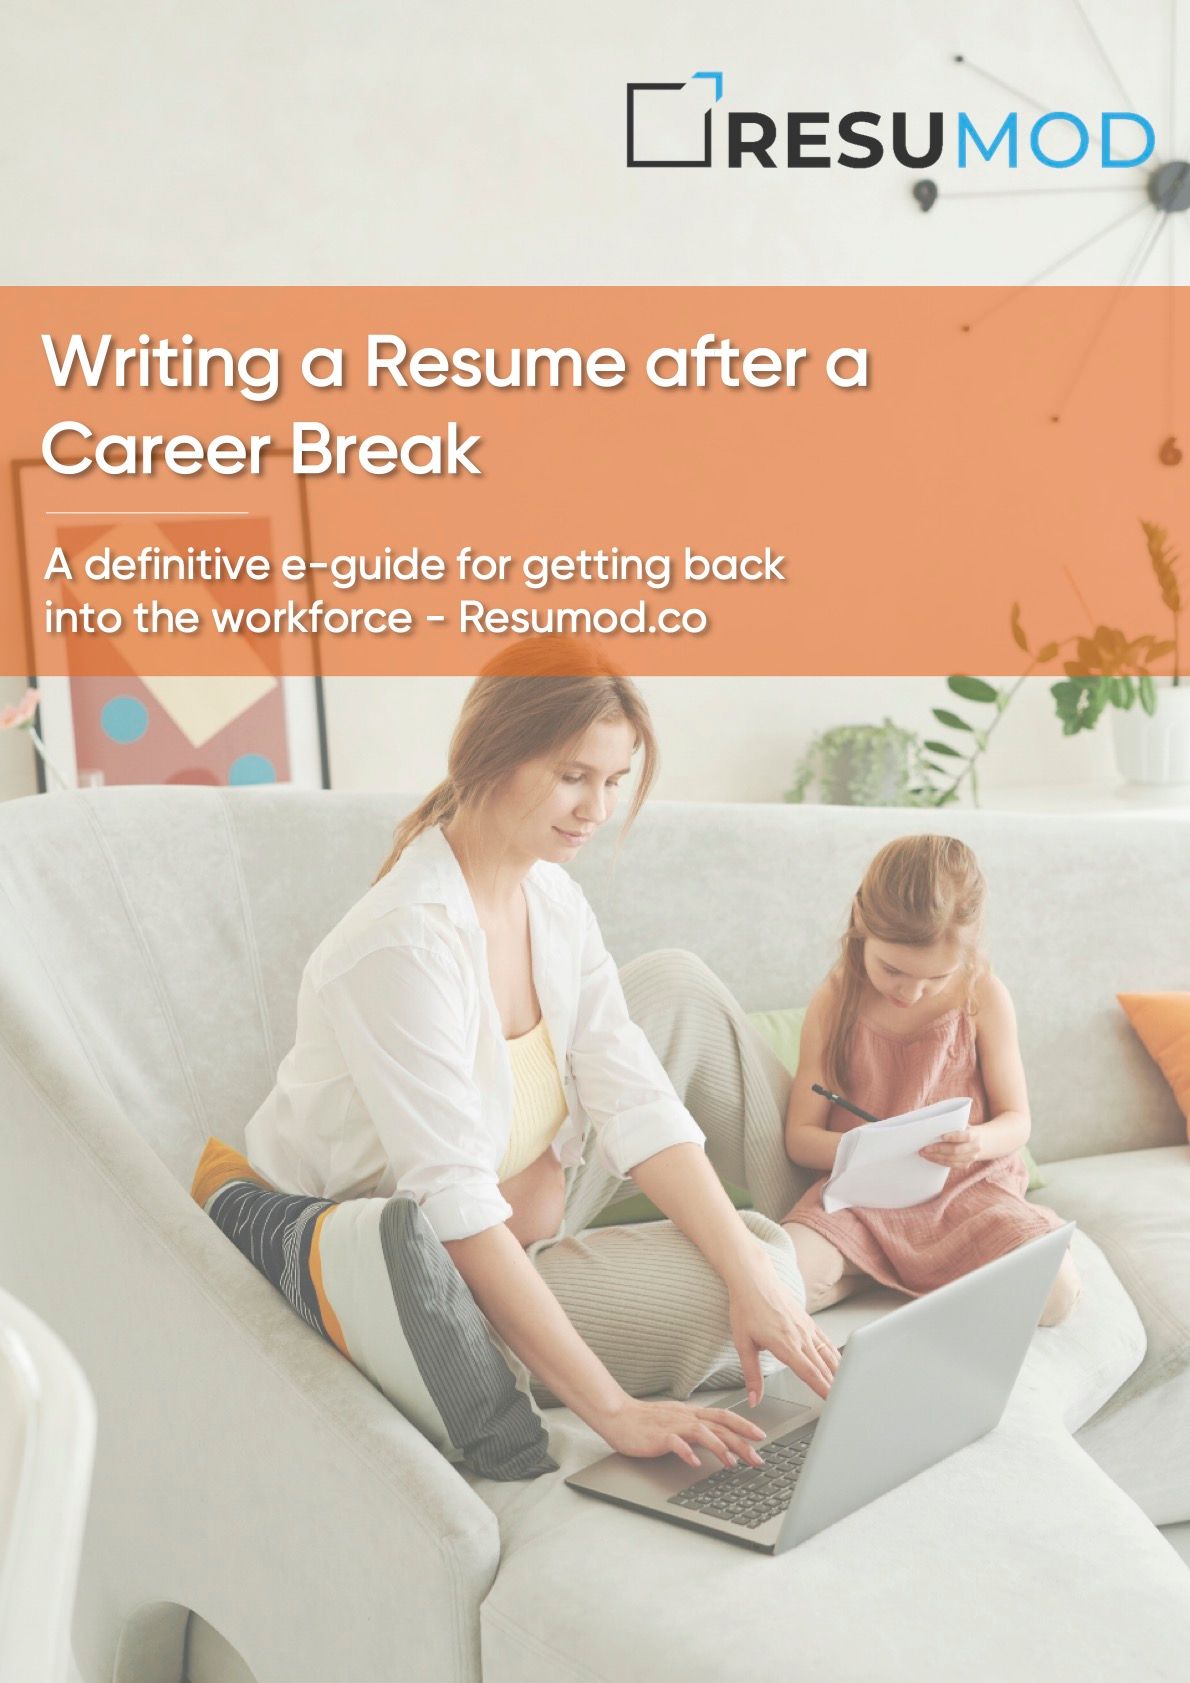 E-Book on Writing a Resume after a Career Break